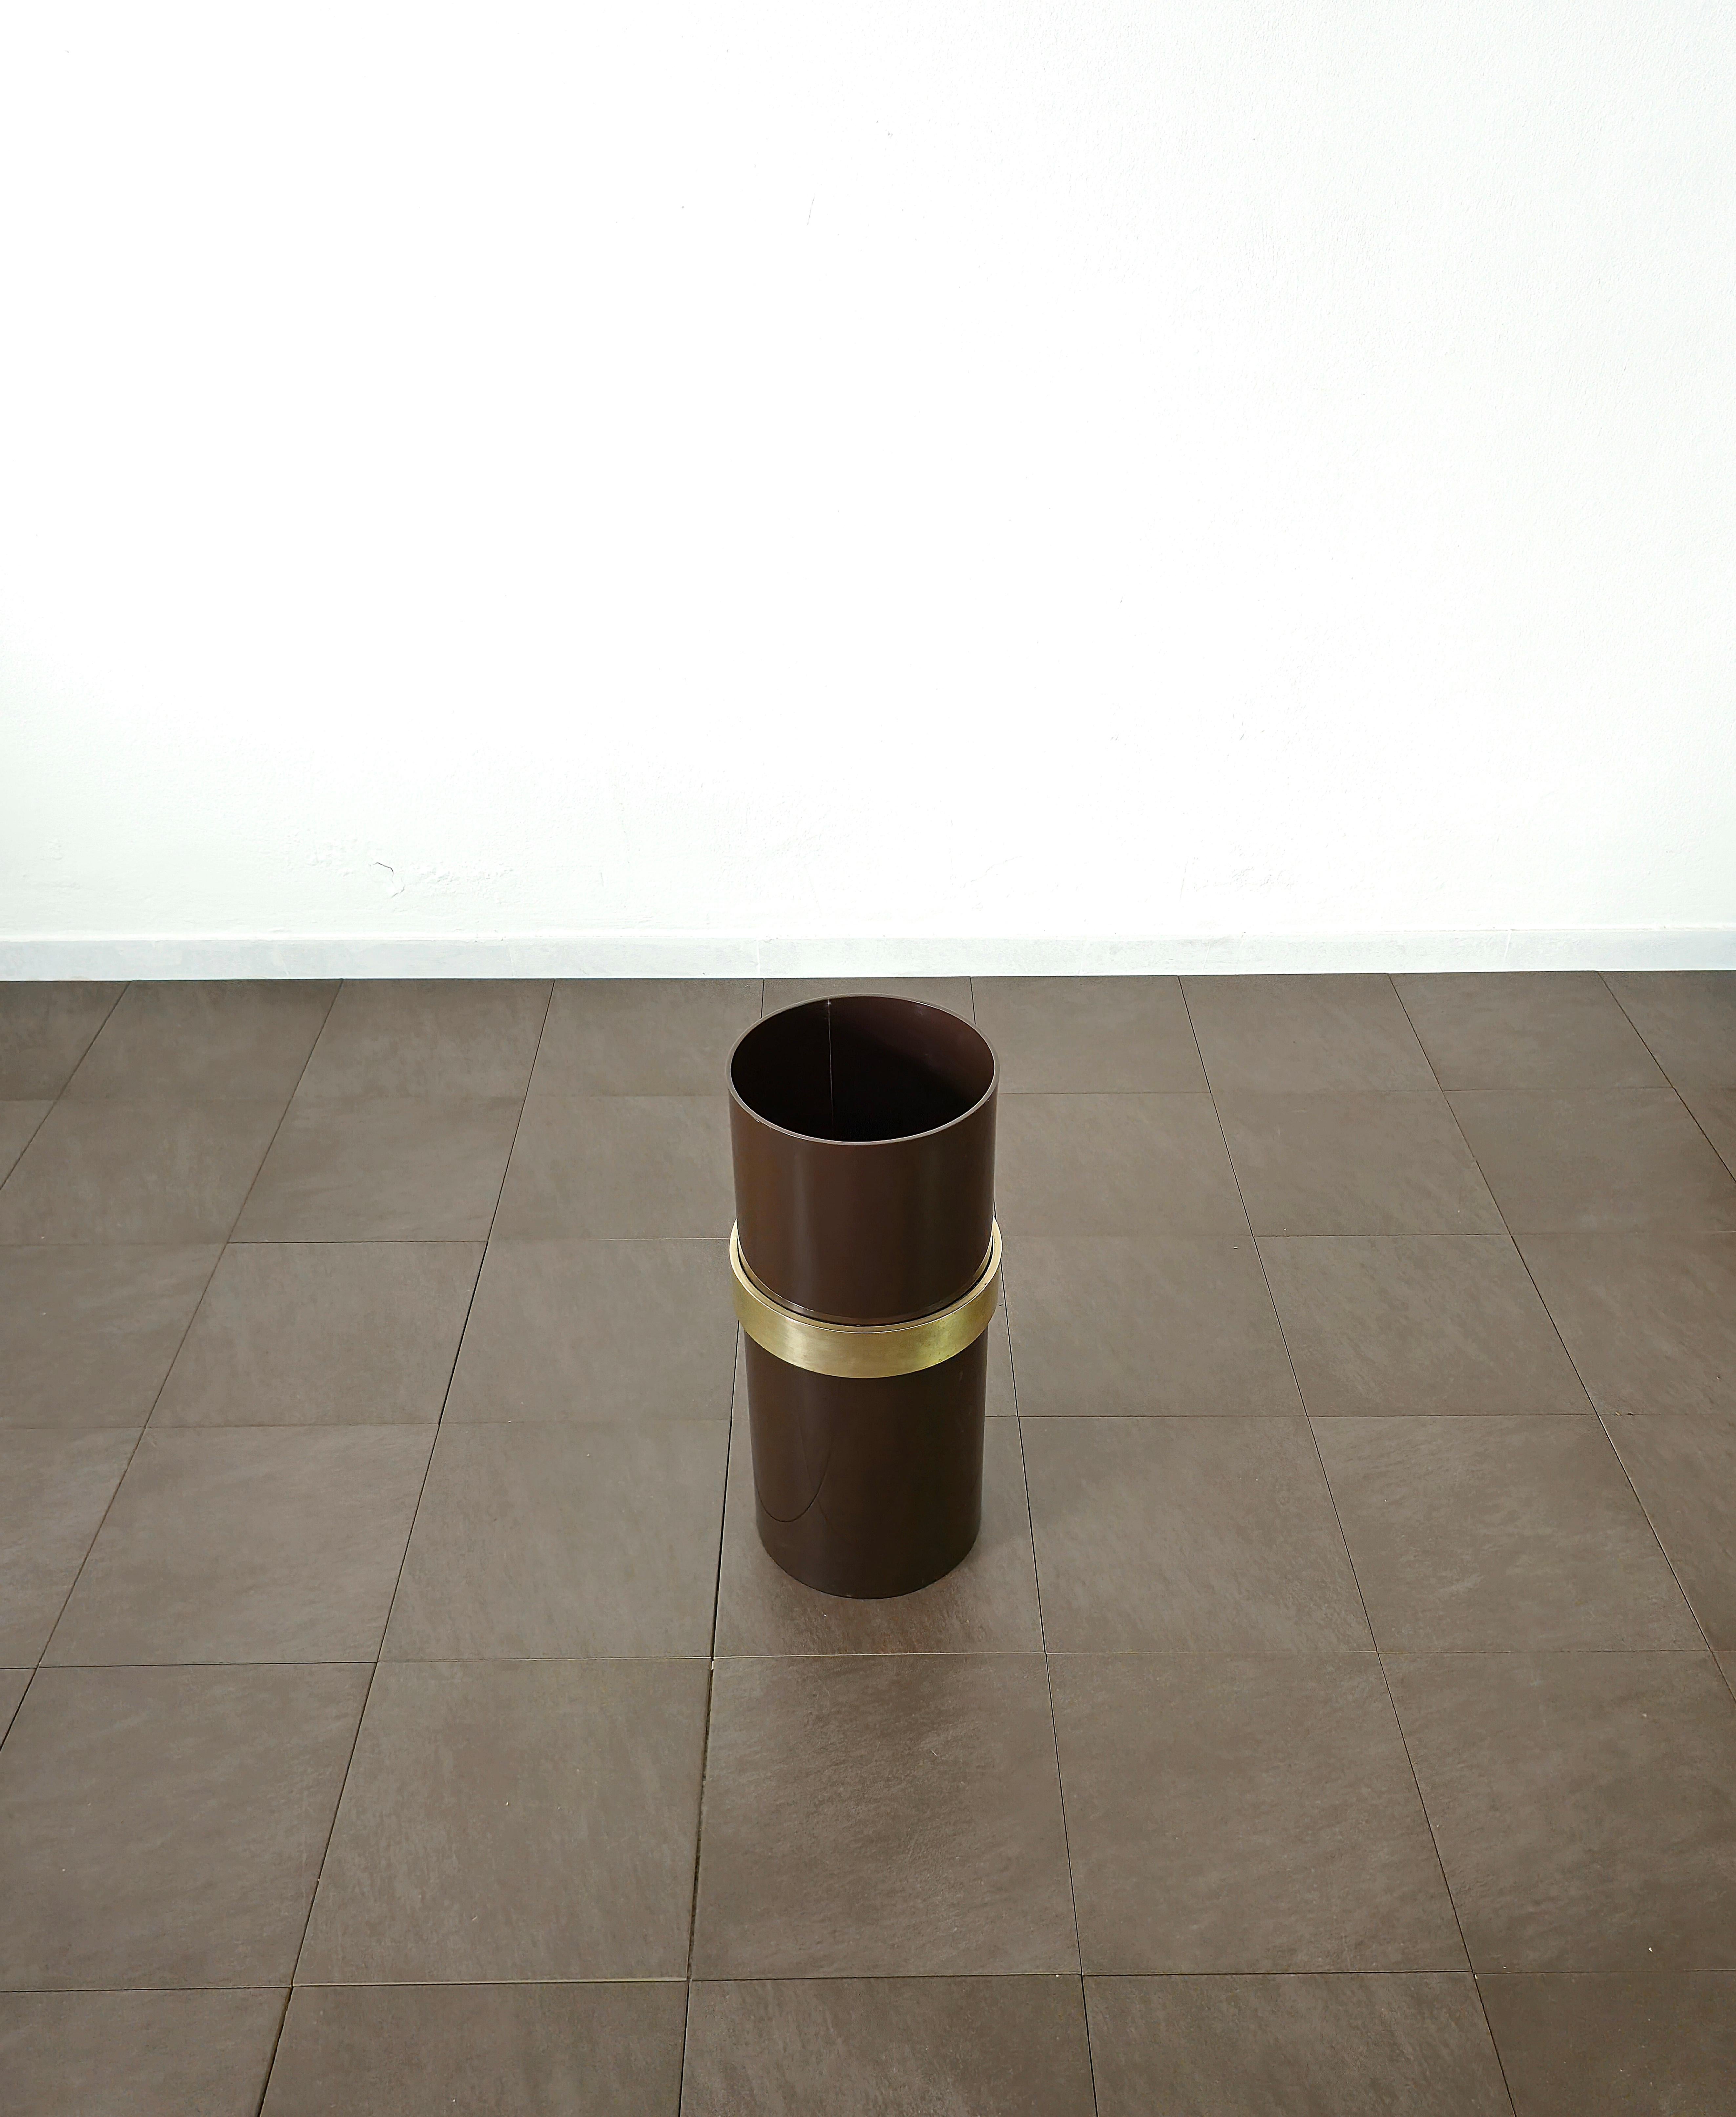 20th Century Midcentury Umbrella Stand Brown Plastic Brass Cylindrical Italian Design 1970s For Sale